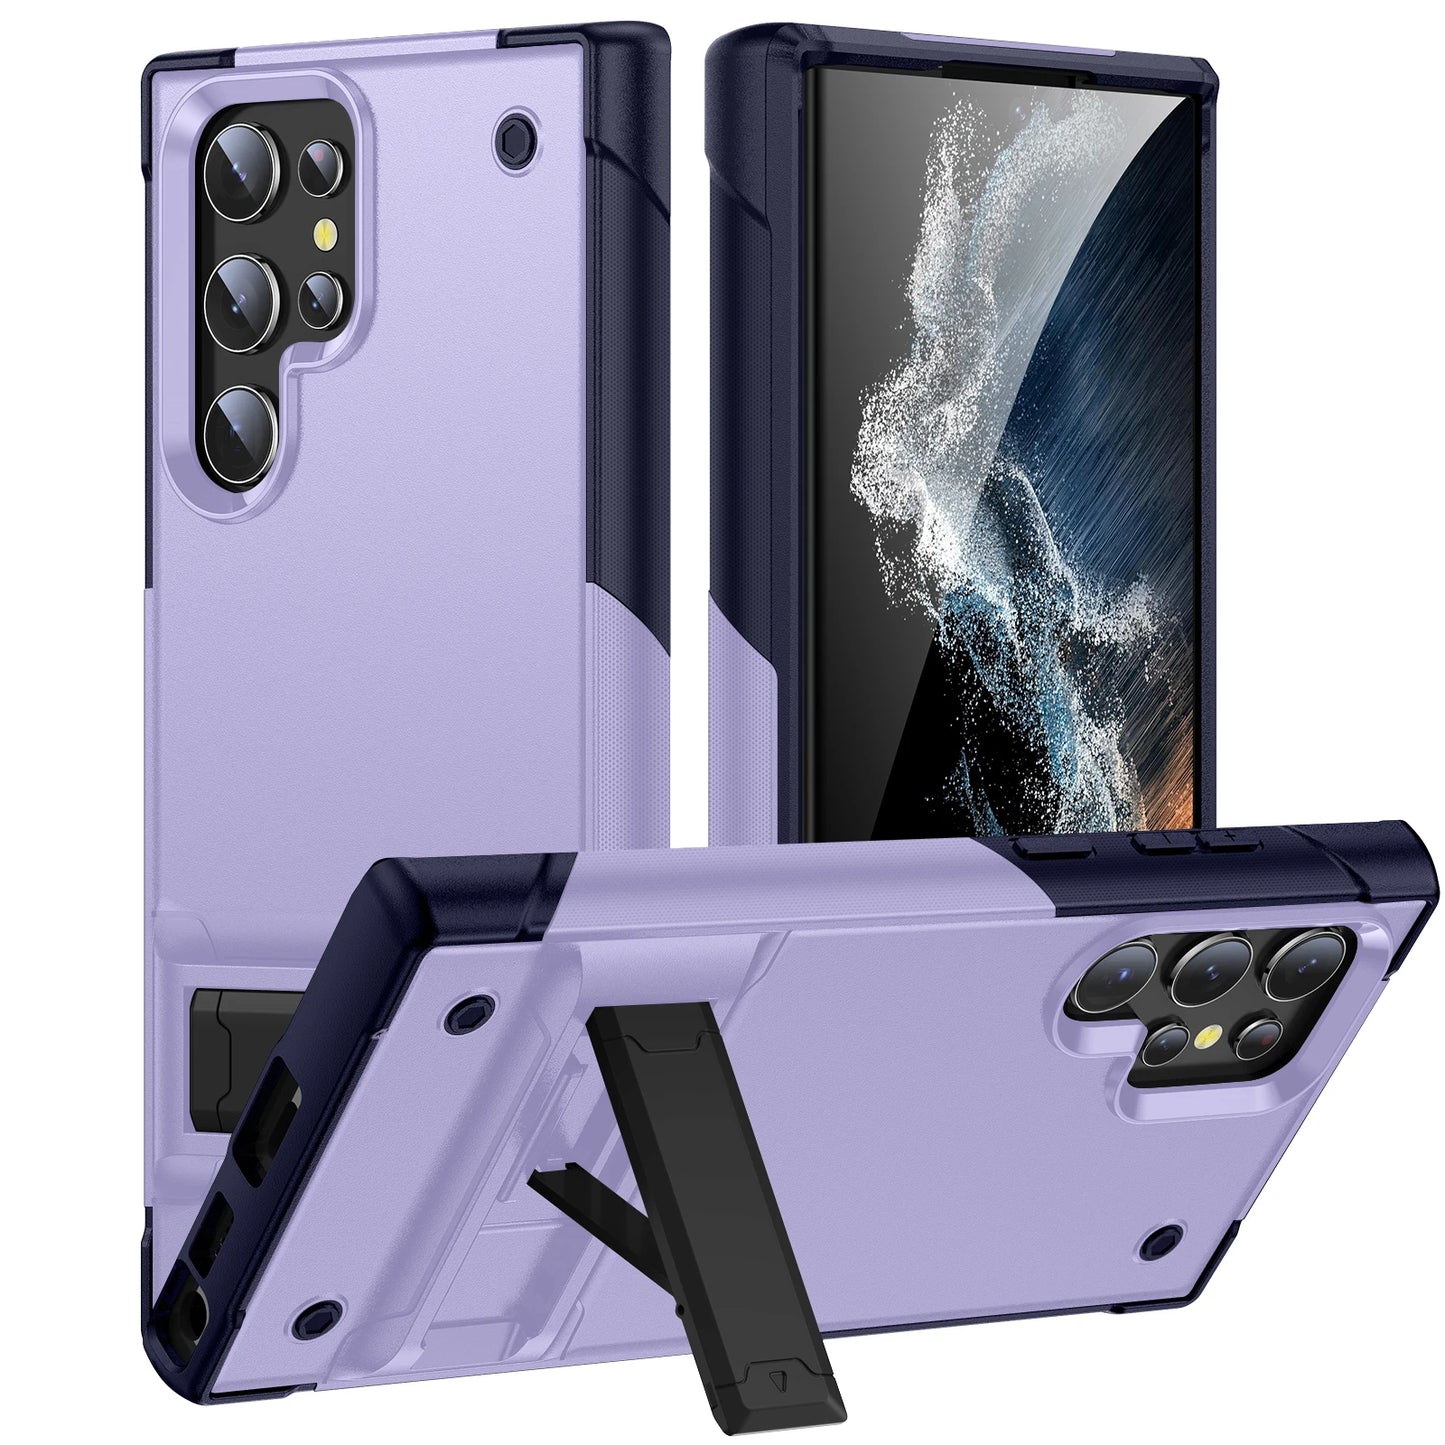 Galaxy Case Shockproof Armor With Kickstand